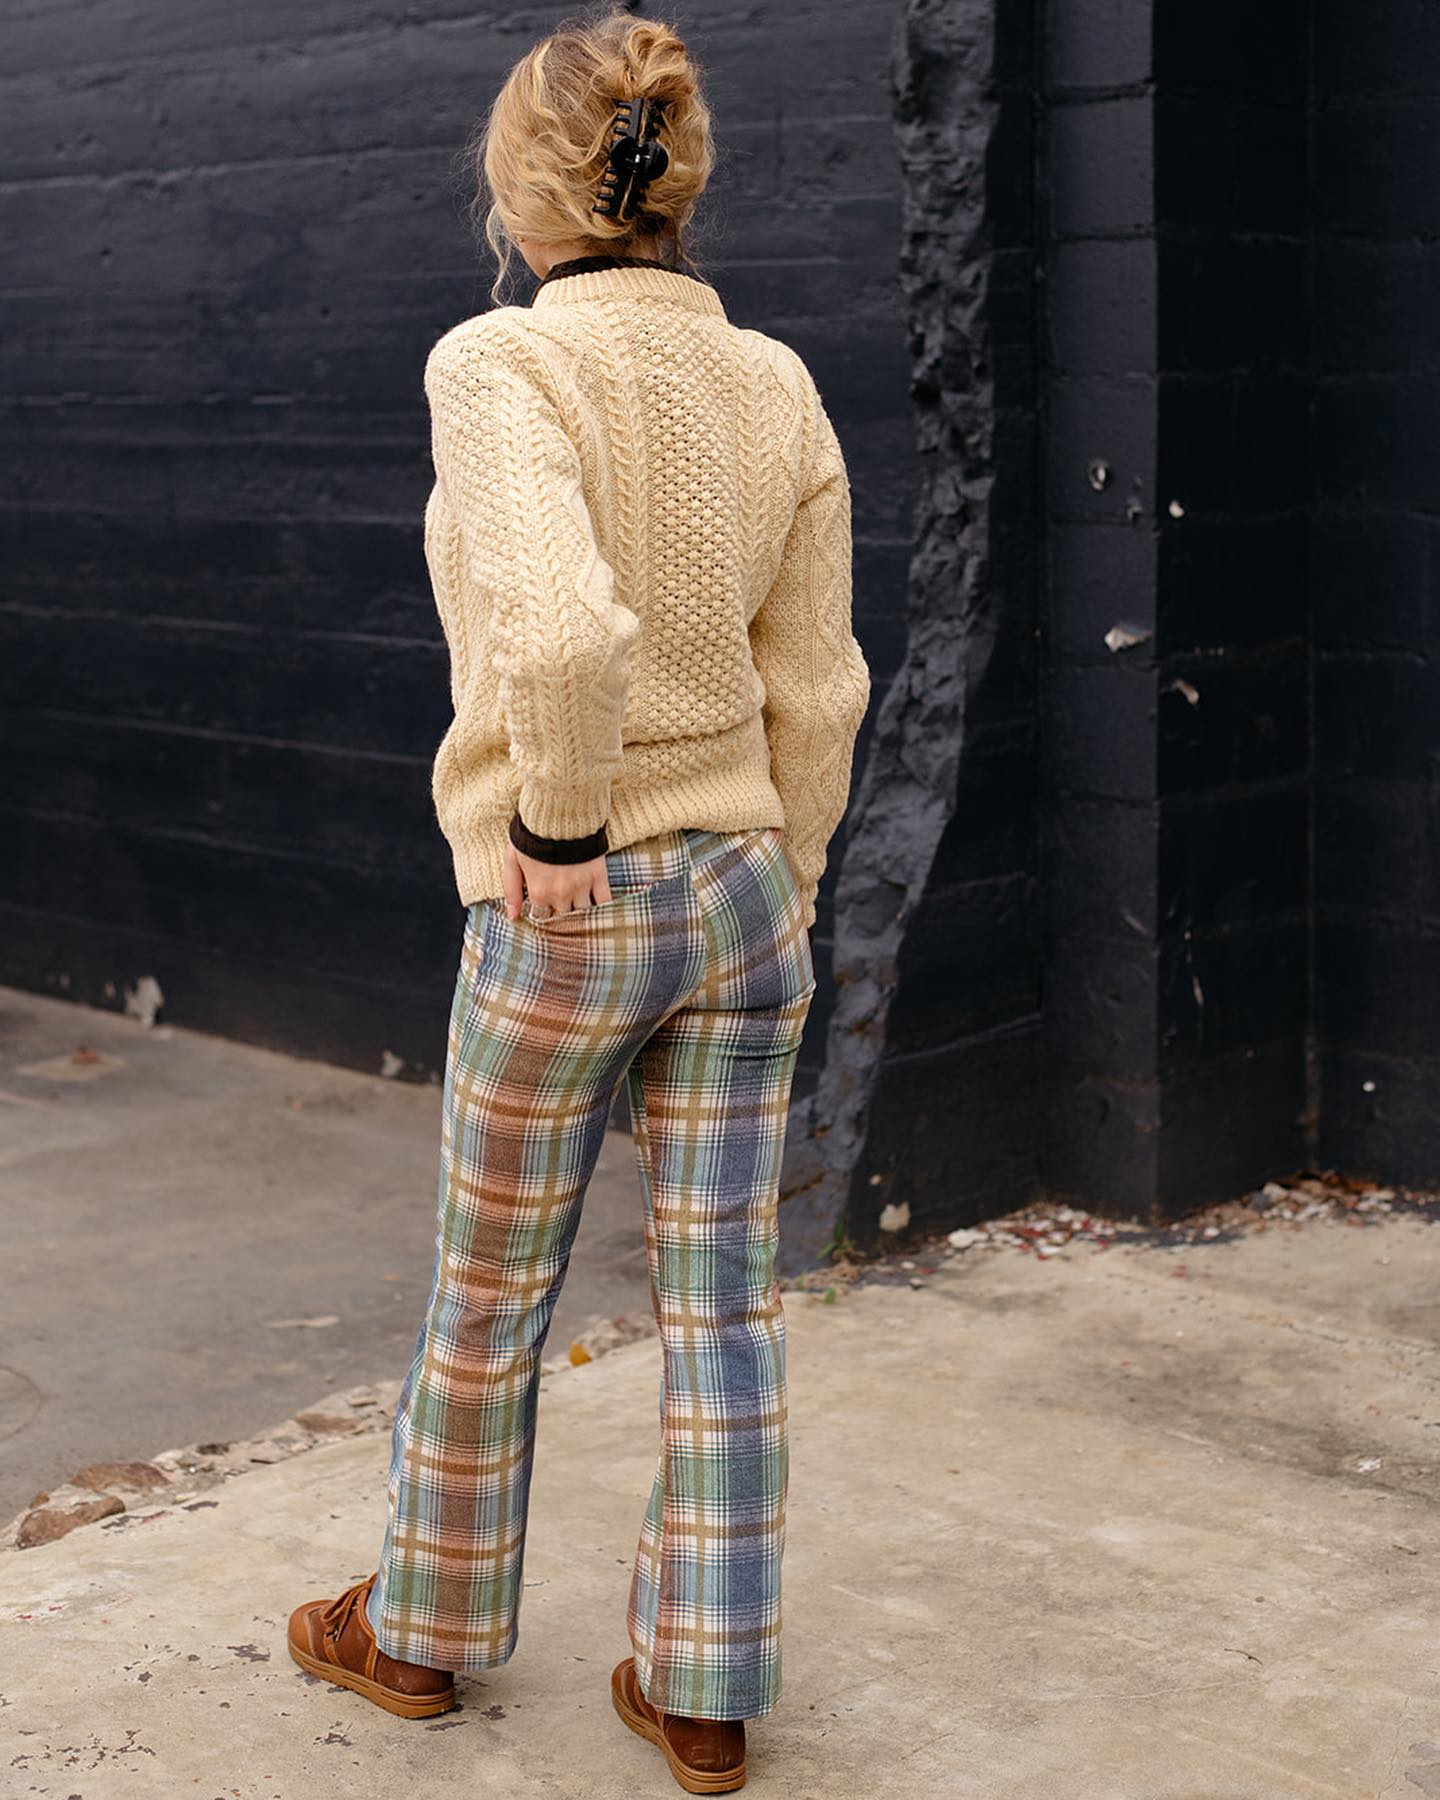 Pair plaid pants with a cable knit sweater